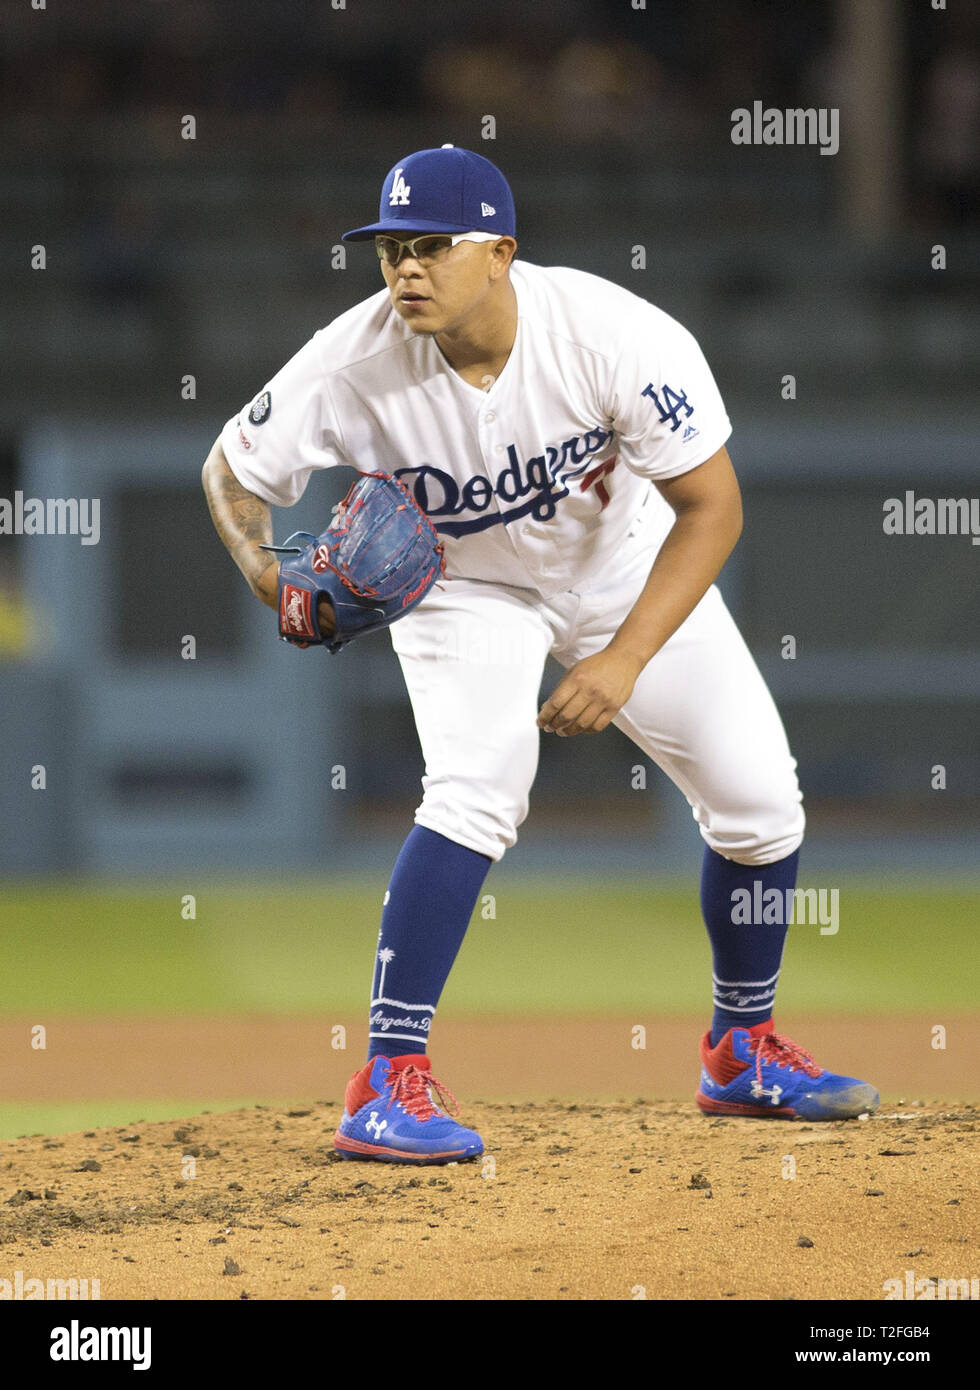 Los Angeles, CALIFORNIA, USA. 1st Apr, 2019. Julio Urias #7 of the Los  Angeles Dodgers pitches during the game against the San Francisco Giants at  Dodger Stadium on April 1, 2019 in